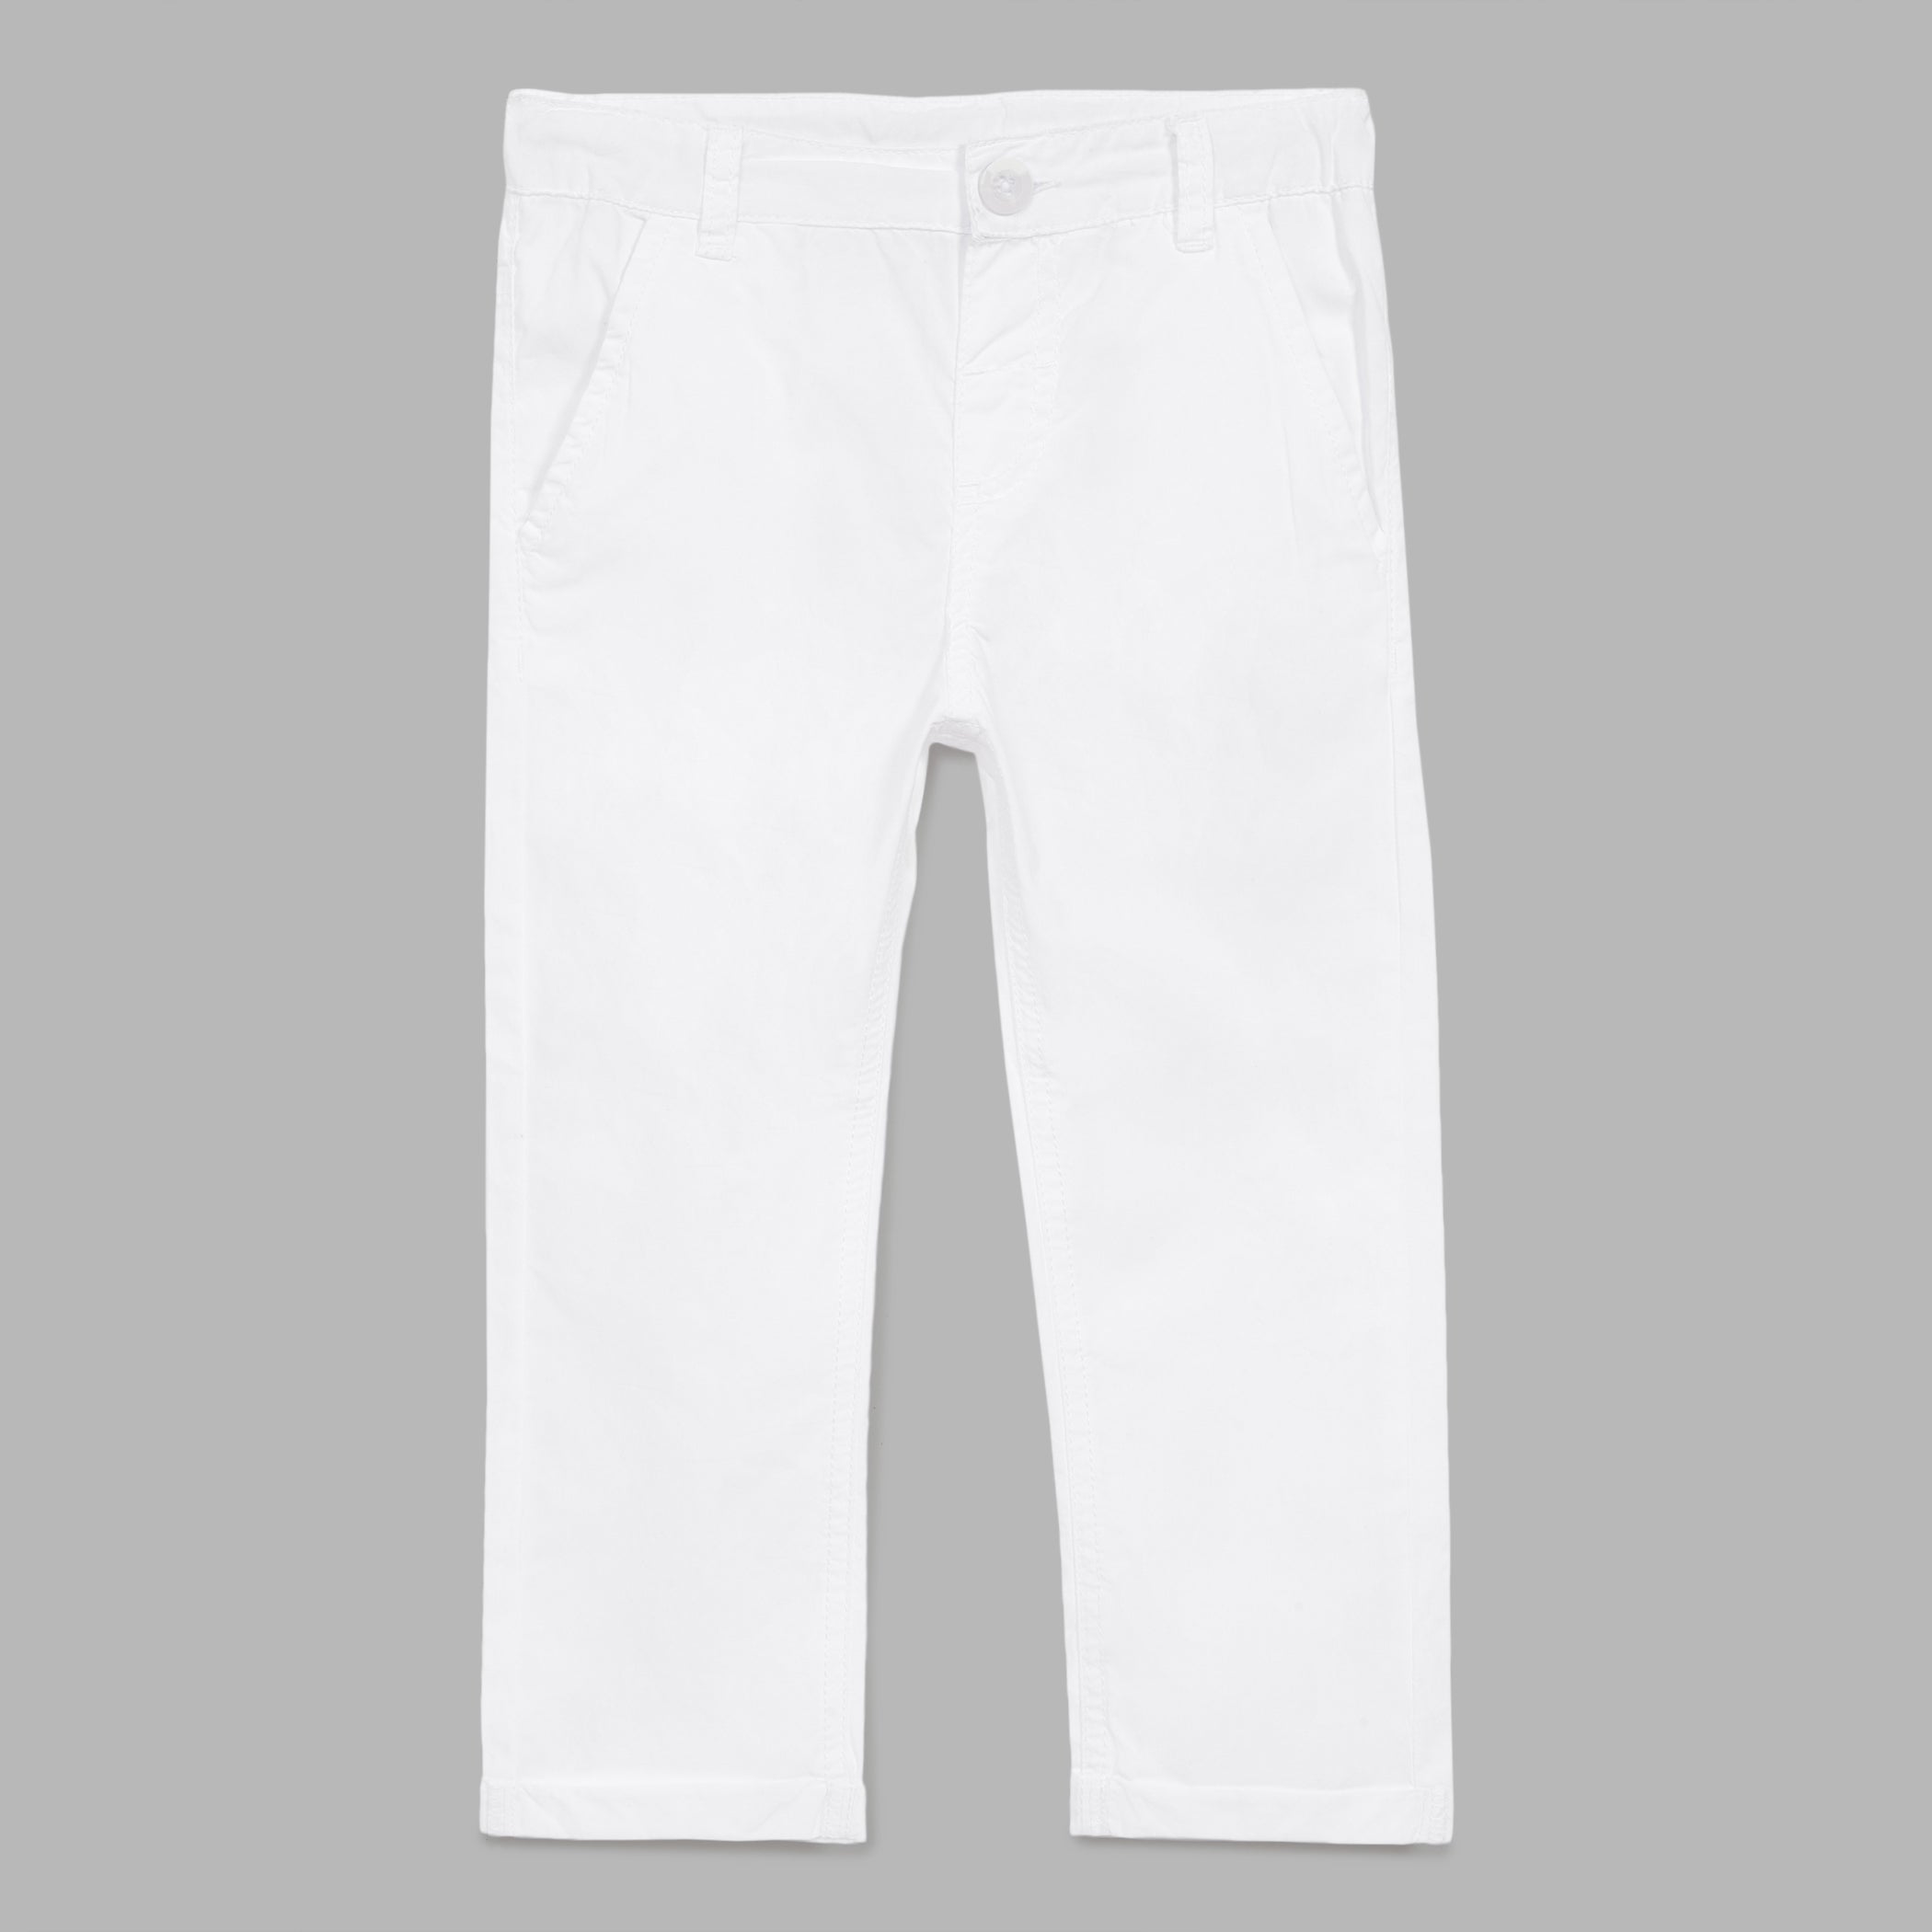 School Uniform White Pant for Boys 23 Years White  Amazonin Clothing   Accessories